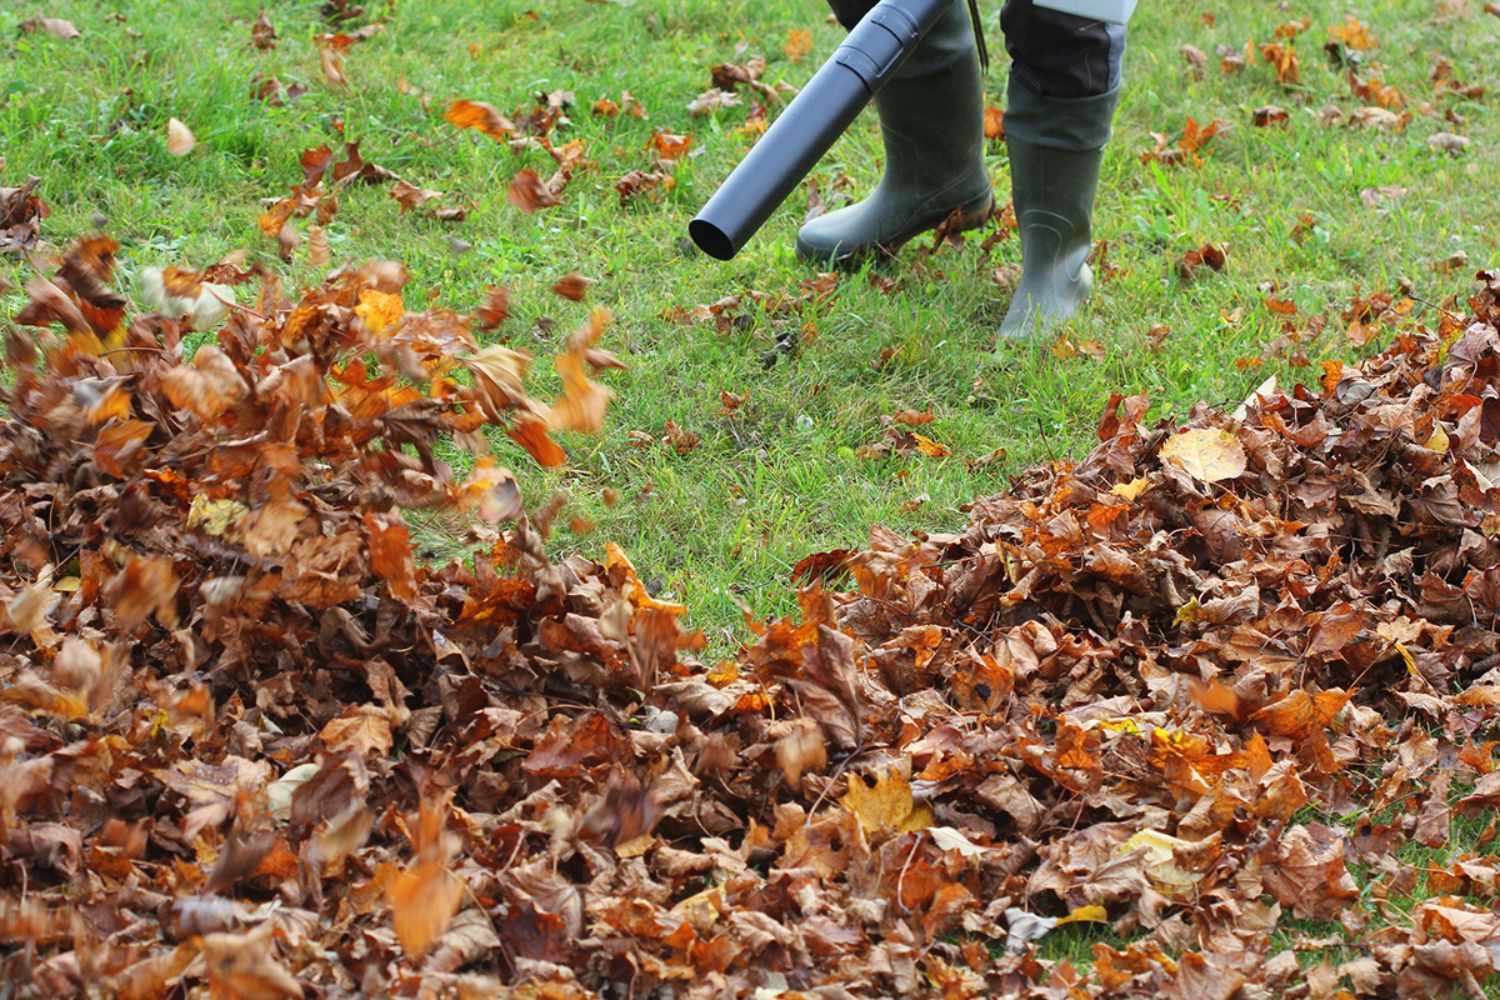 A person wearing tall boots while blowing leaves in a yard using the best battery-powered leaf blower.